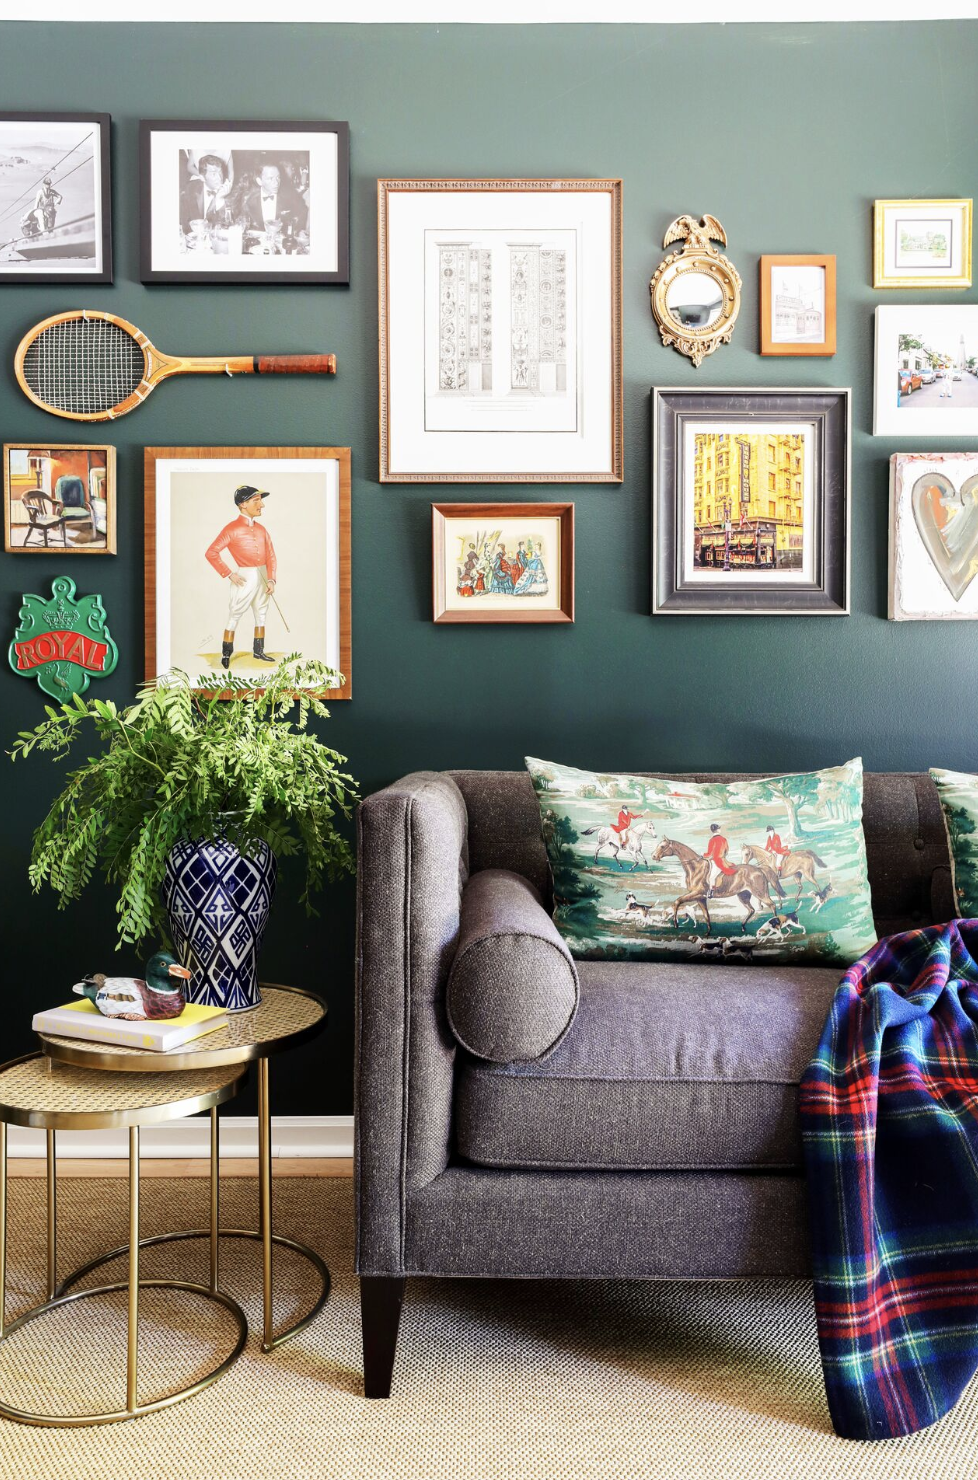 30 Easy, Unexpected Living Room Decorating Ideas